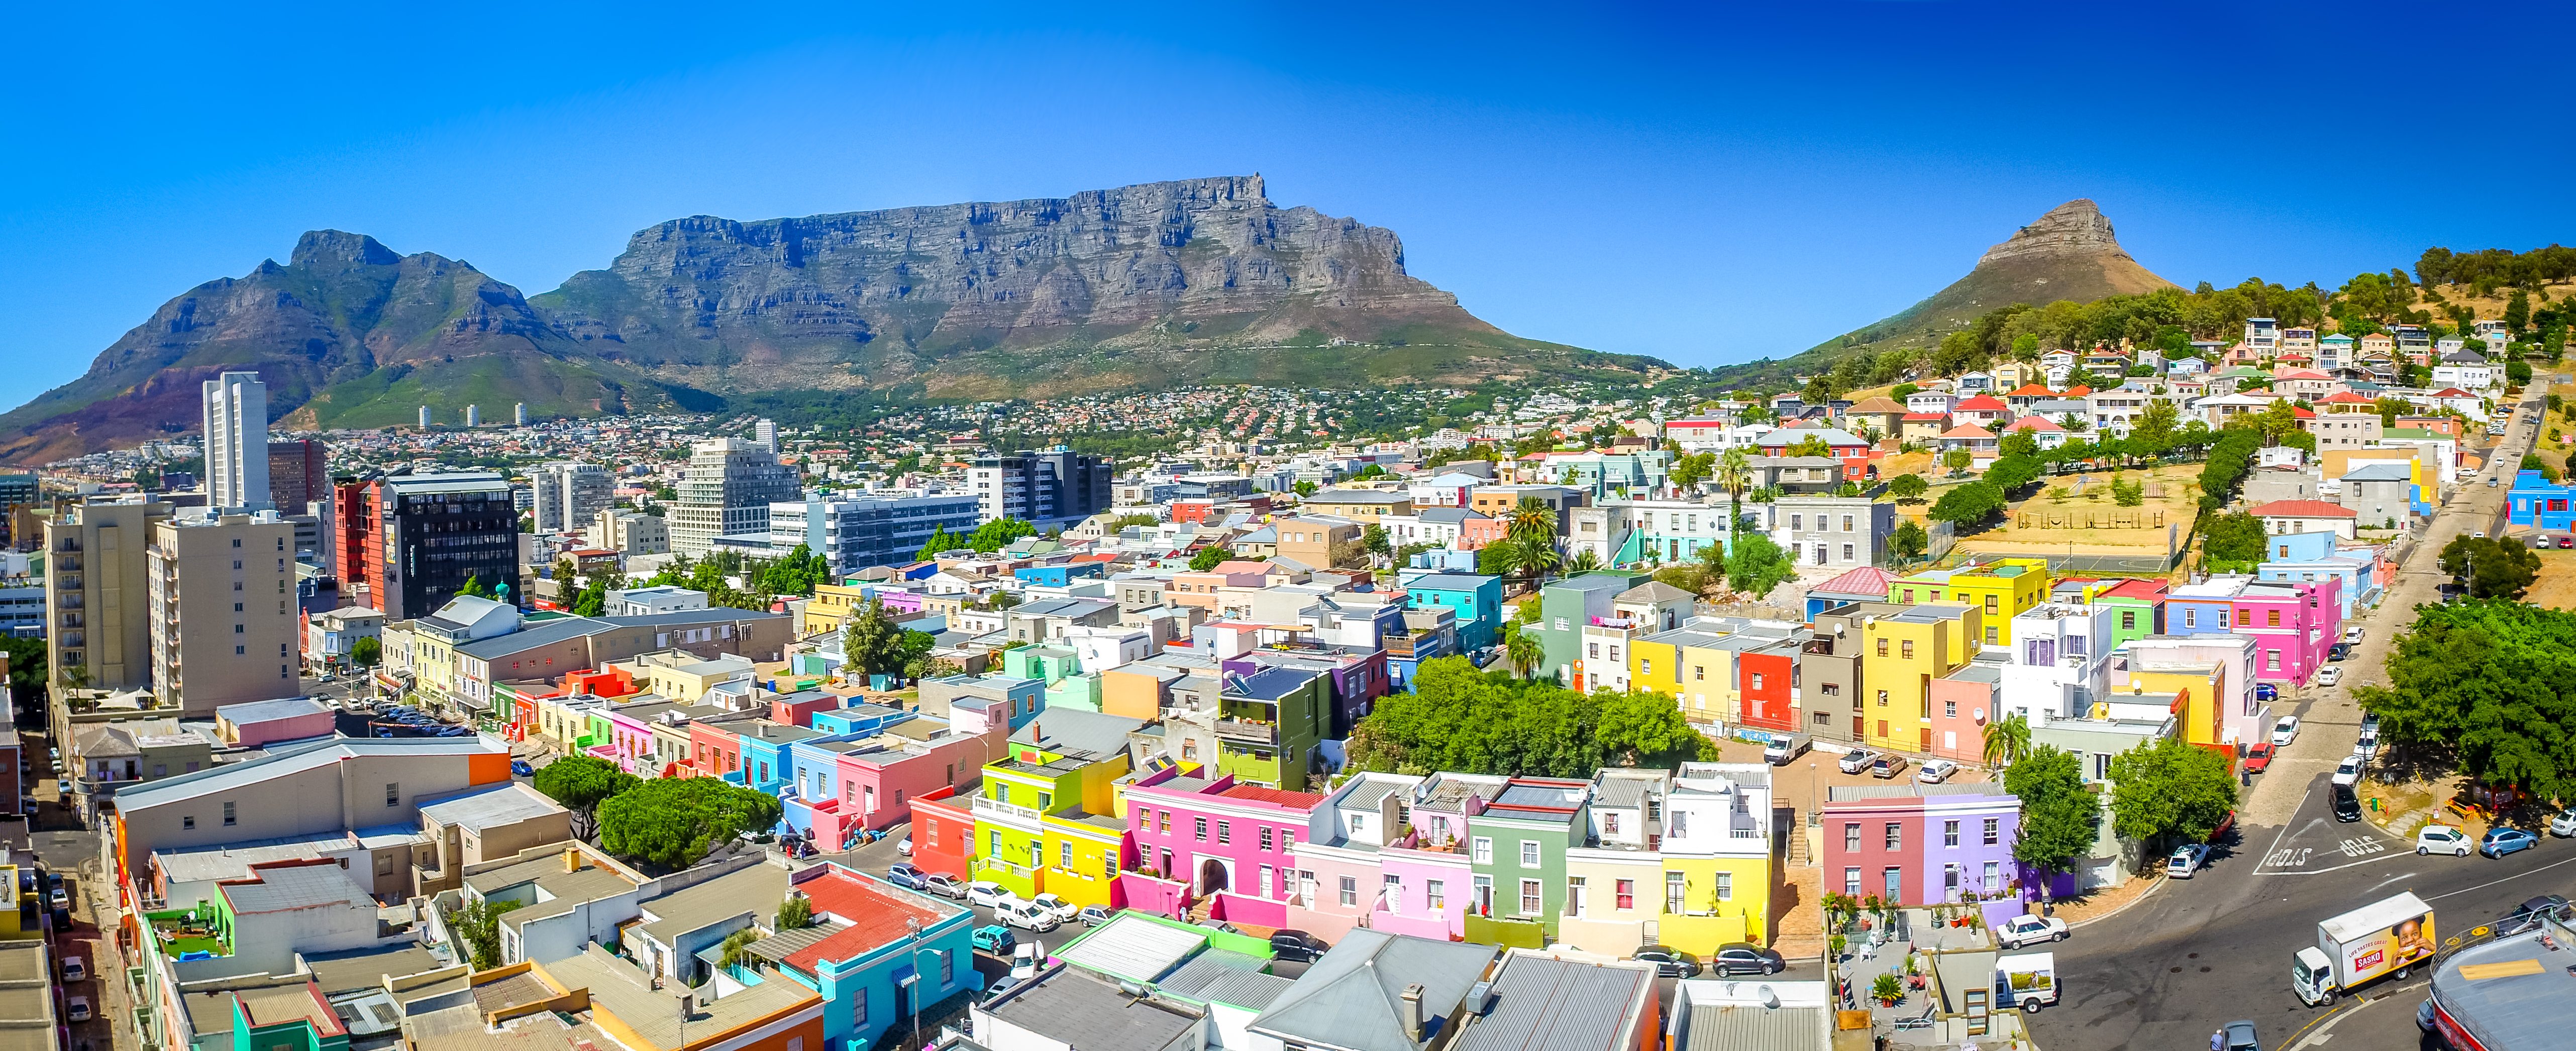 General 5127x2092 Cape Town mountains Table Mountain city building South Africa colorful cityscape road